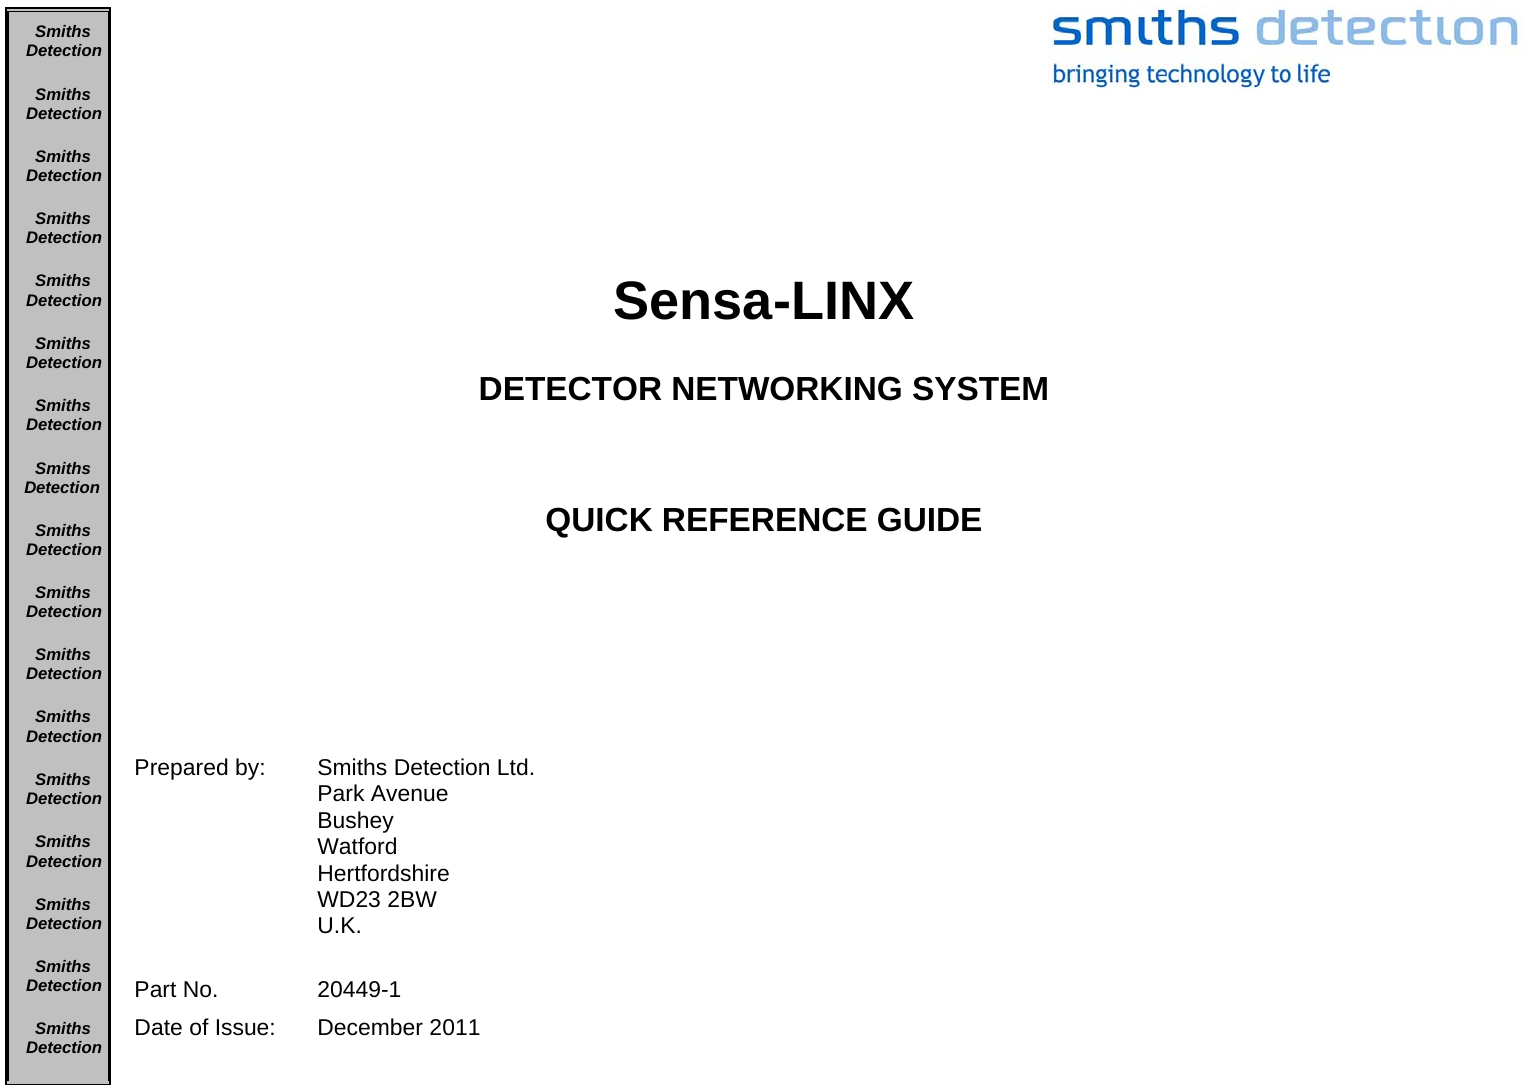    Sensa-LINX  DETECTOR NETWORKING SYSTEM   QUICK REFERENCE GUIDE      Prepared by:  Smiths Detection Ltd. Park Avenue Bushey Watford Hertfordshire WD23 2BW U.K.    Part No.  20449-1 Date of Issue:   December 2011 SmithsDetectionSmithsDetectionSmithsDetectionSmithsDetectionSmithsDetectionSmithsDetectionSmithsDetectionSmithsDetectionSmithsDetectionSmithsDetectionSmithsDetectionSmithsDetectionSmithsDetectionSmithsDetectionSmithsDetectionSmithsDetectionSmithsDetection 